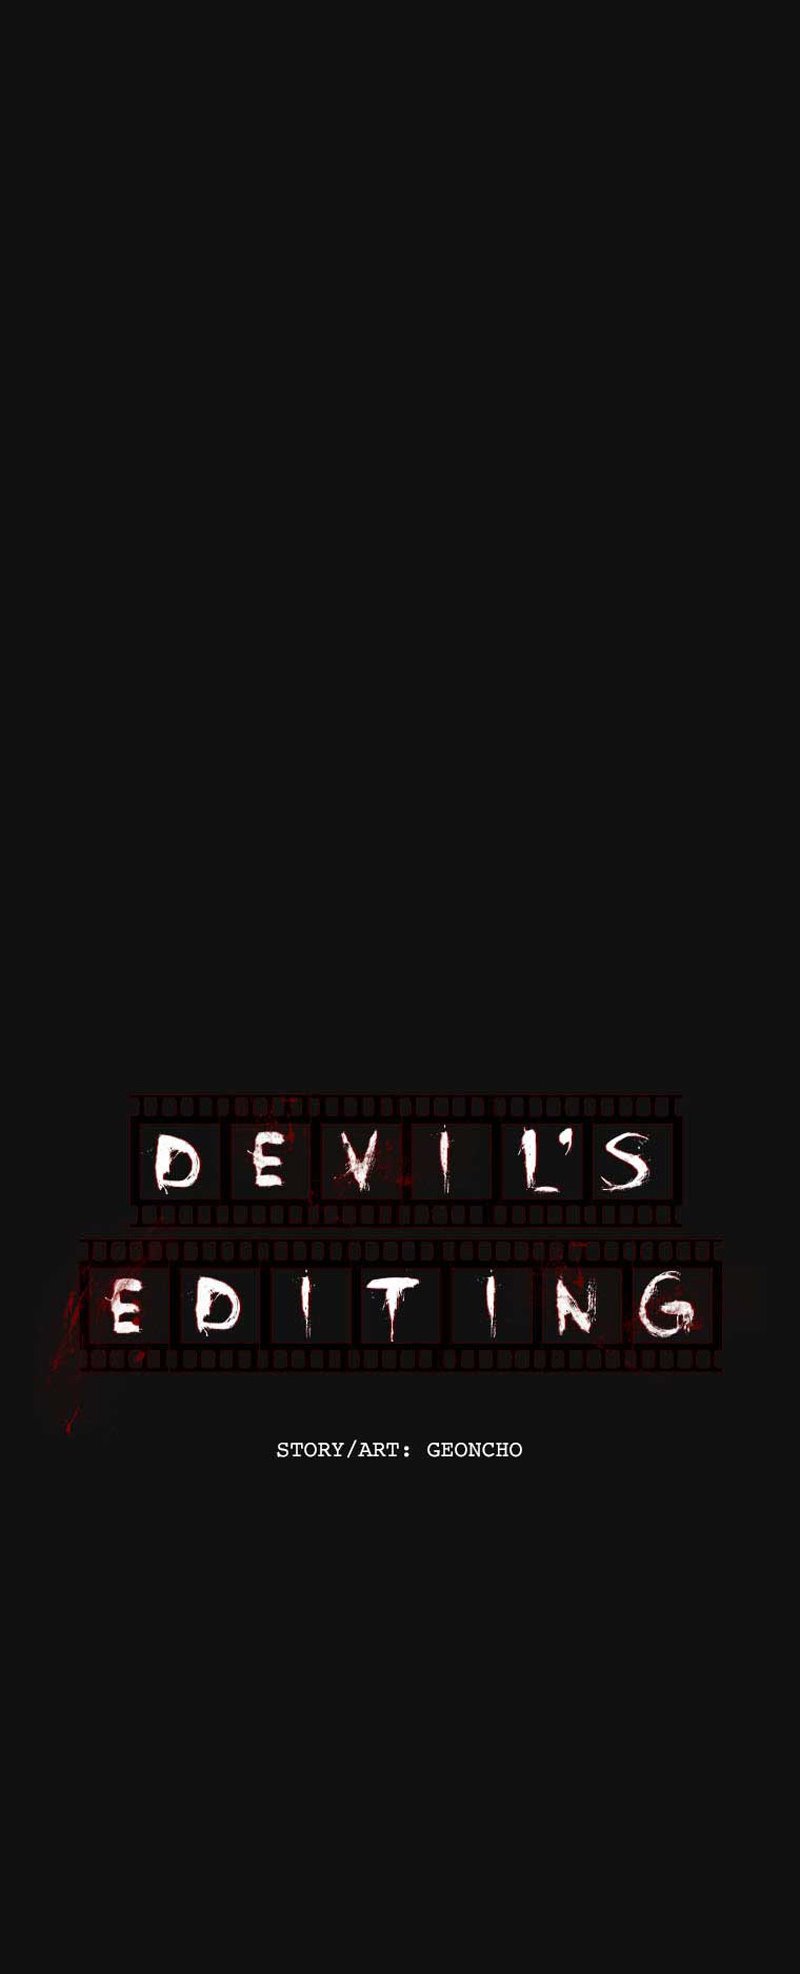 Devil’s Editing Chapter 14